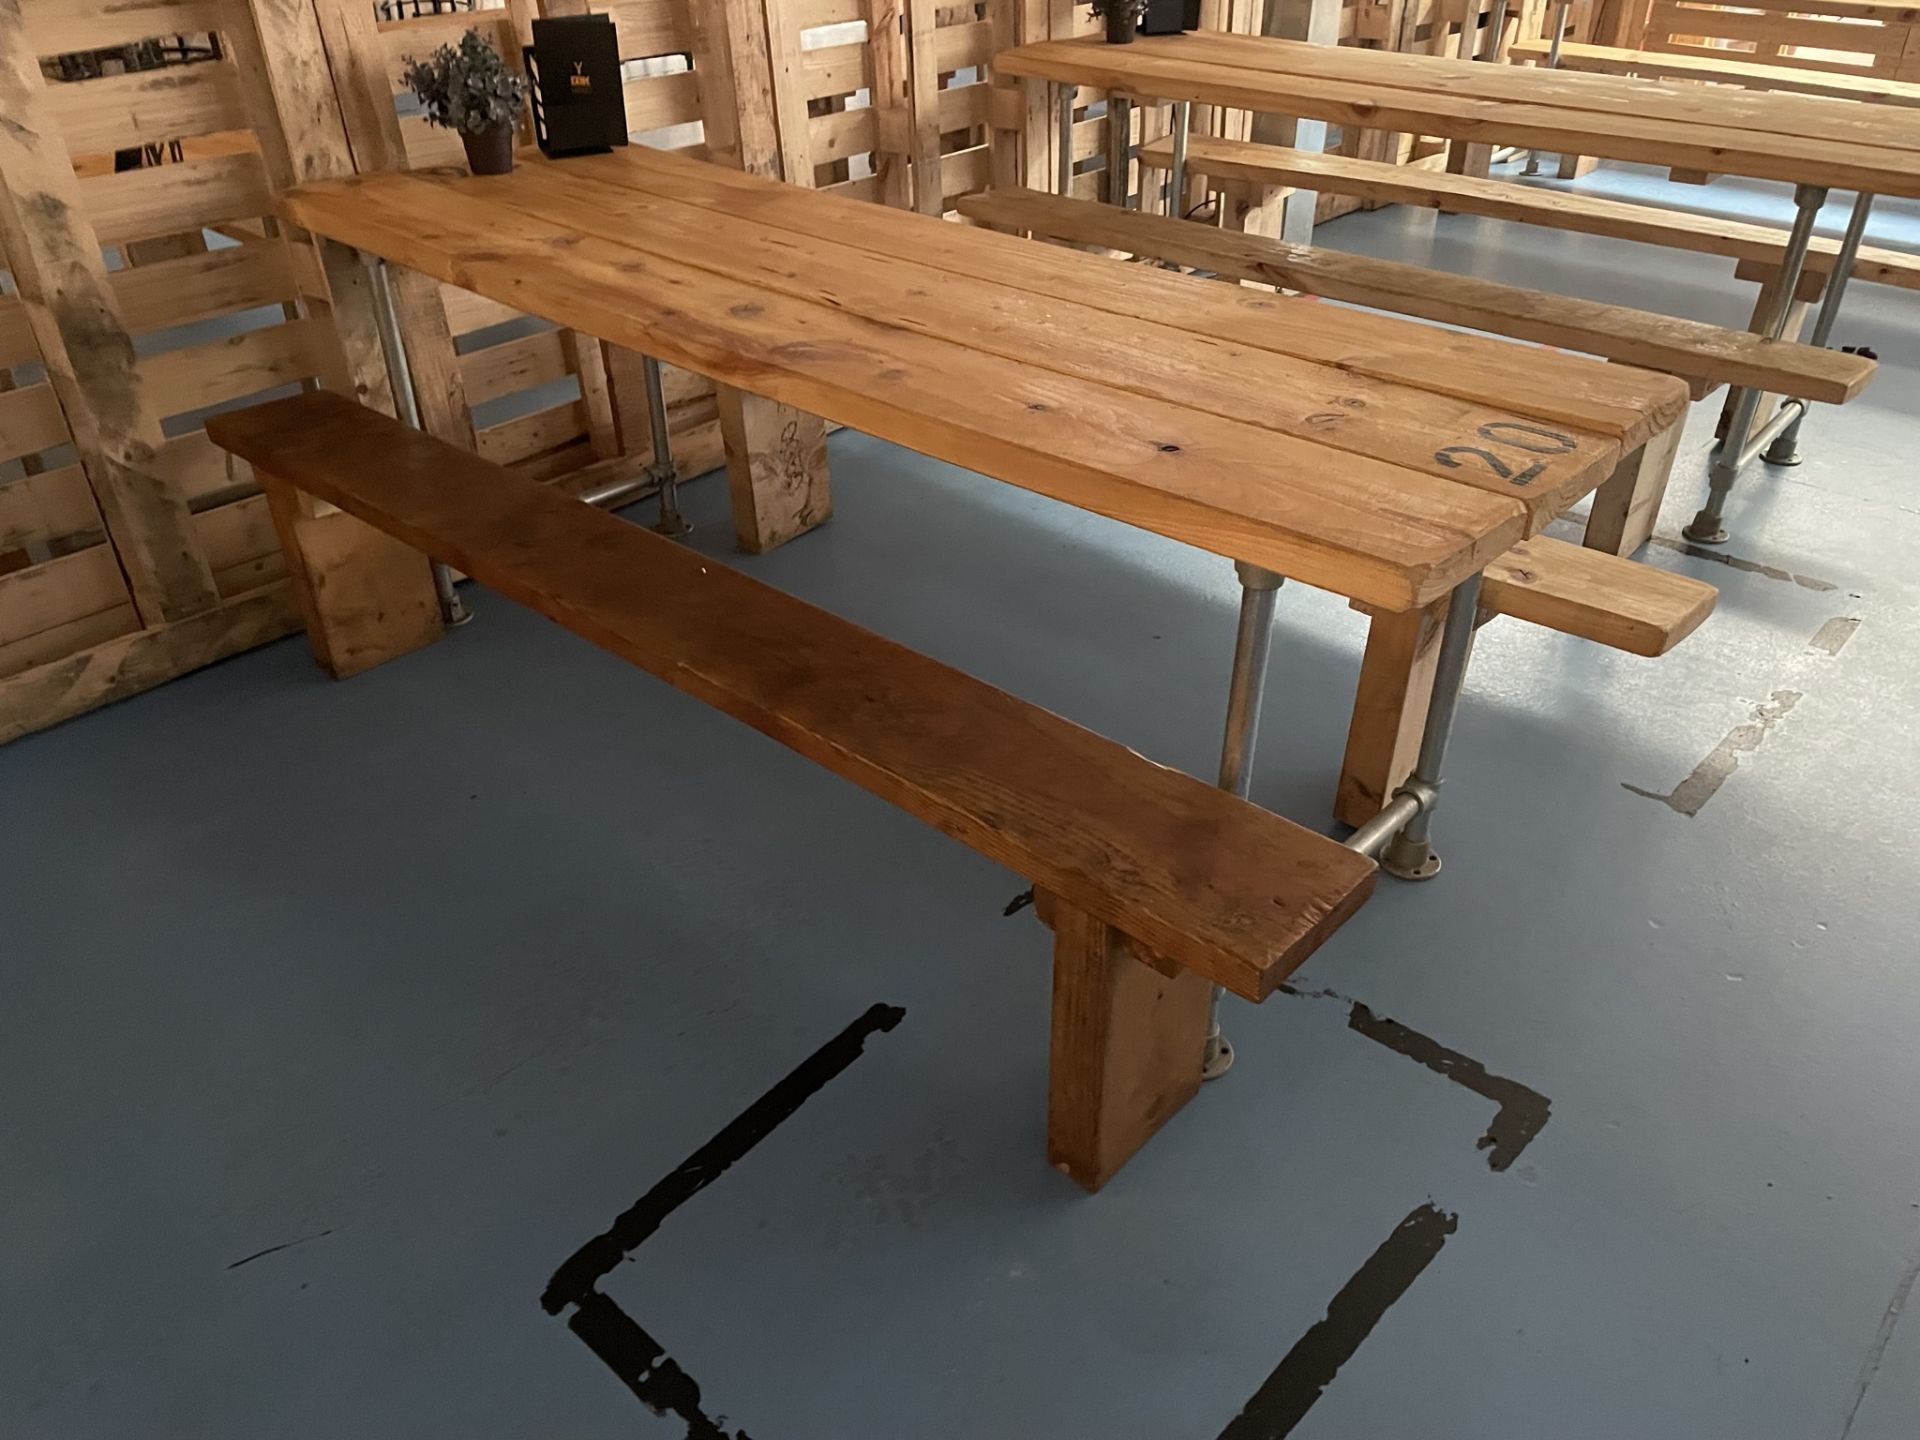 8 x Wooden Dining Tables w/ Metal Frames & 16 x Wooden Seating Benches - Image 7 of 8